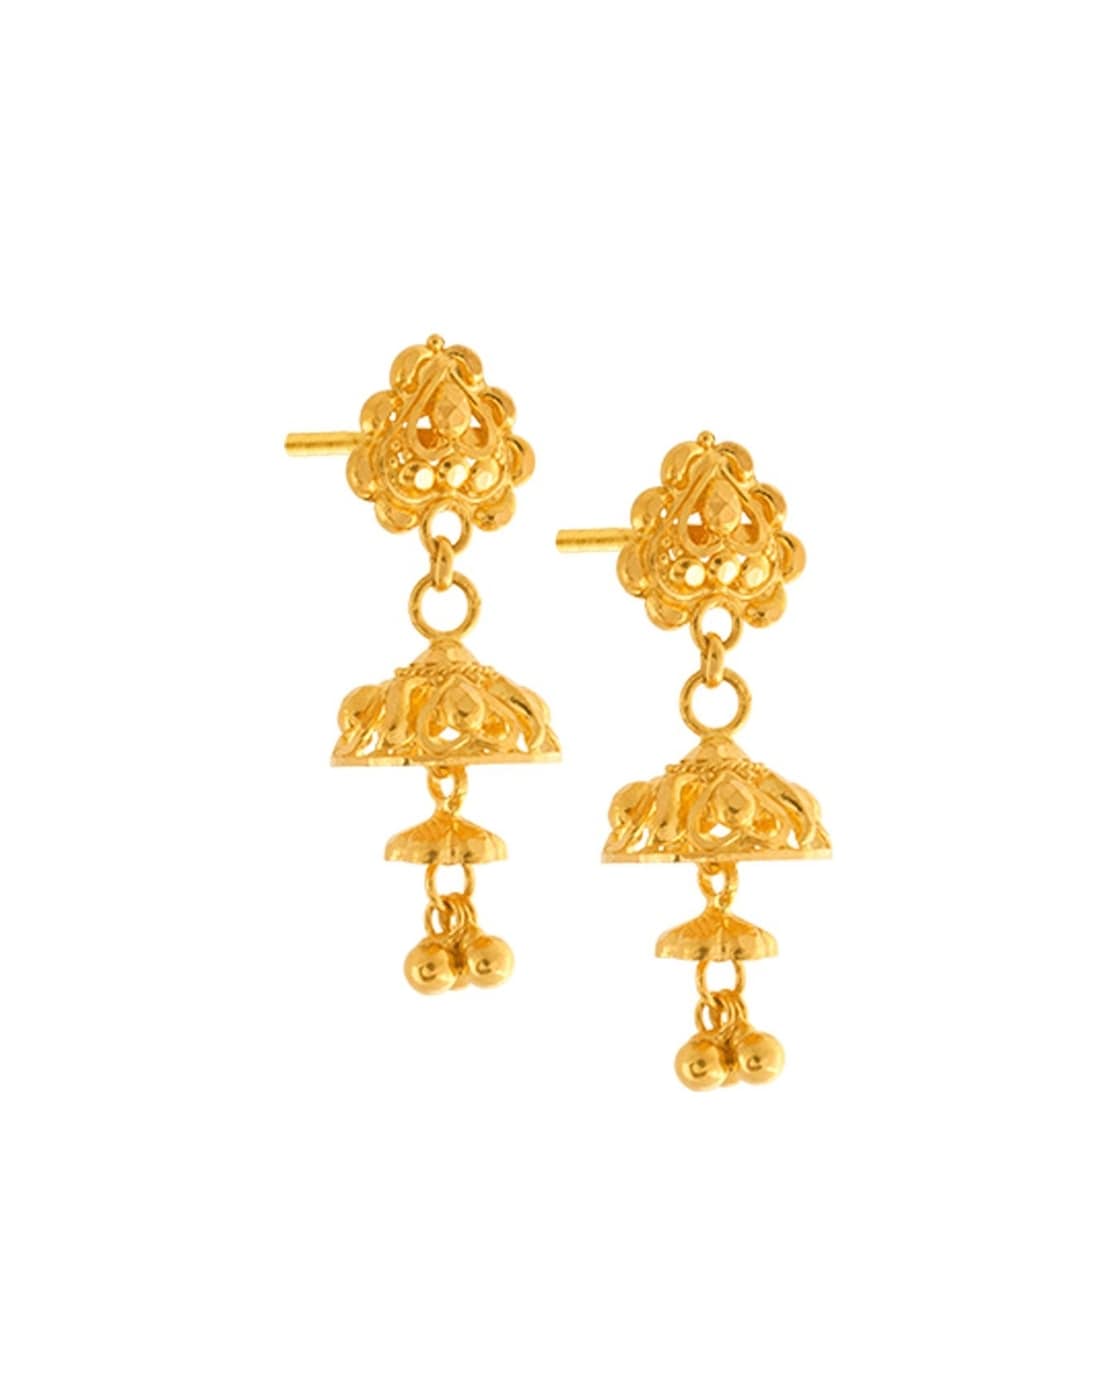 10kt Yellow Gold Pendant  Earring  Pc Chandra Jewellers Earring Collection  With Price Transparent PNG  1000x1000  Free Download on NicePNG